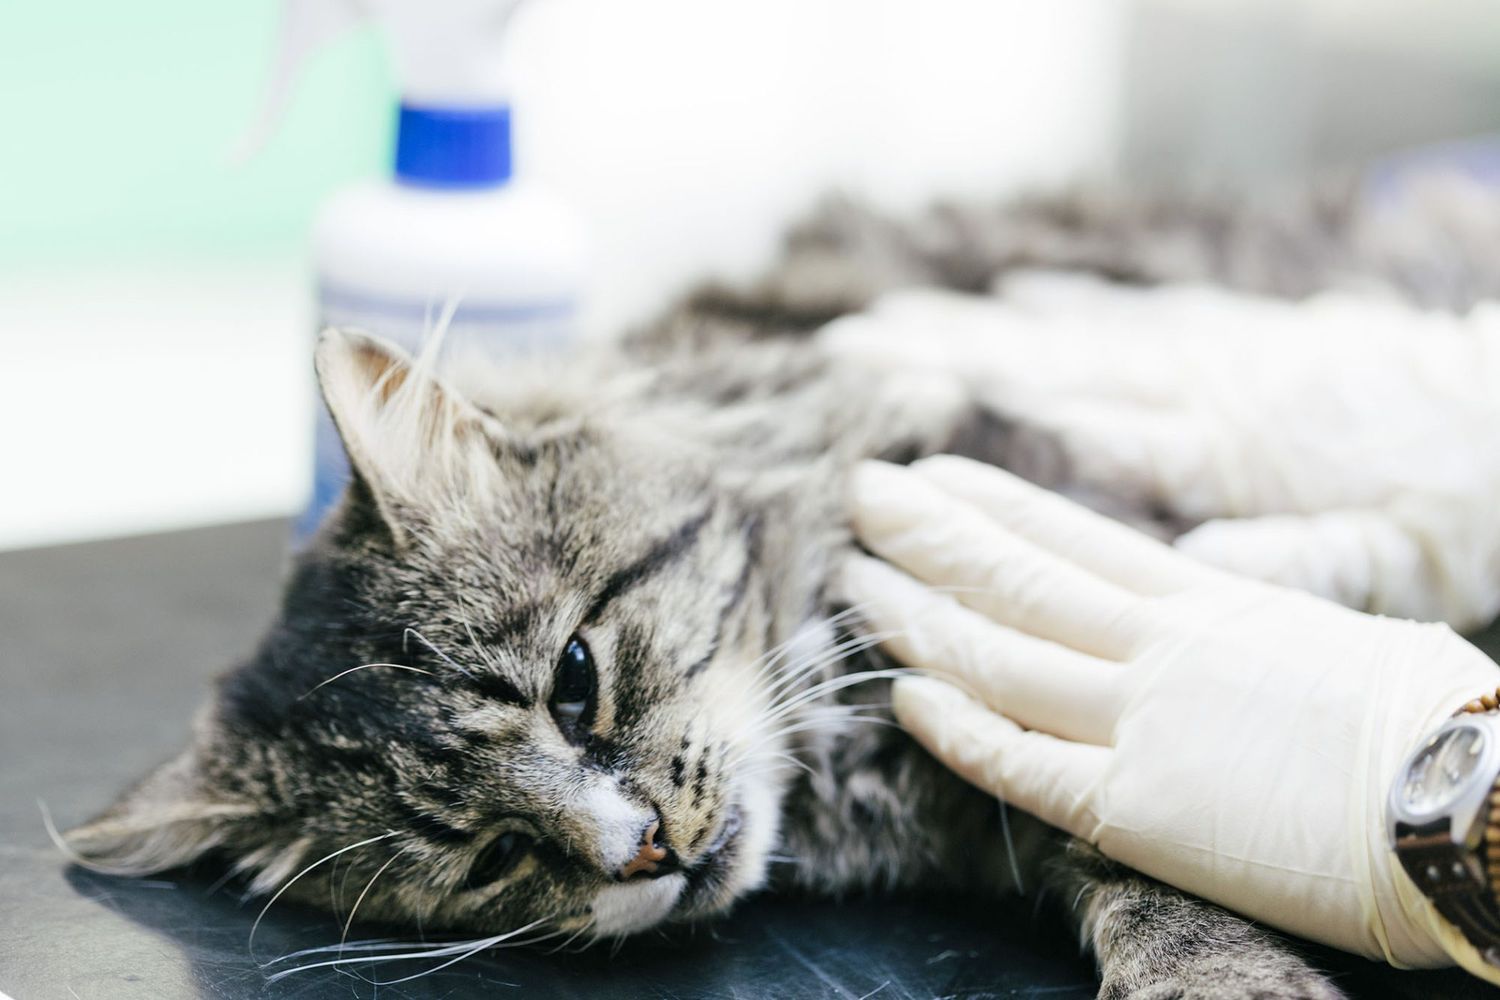 cat under anesthesia with vet